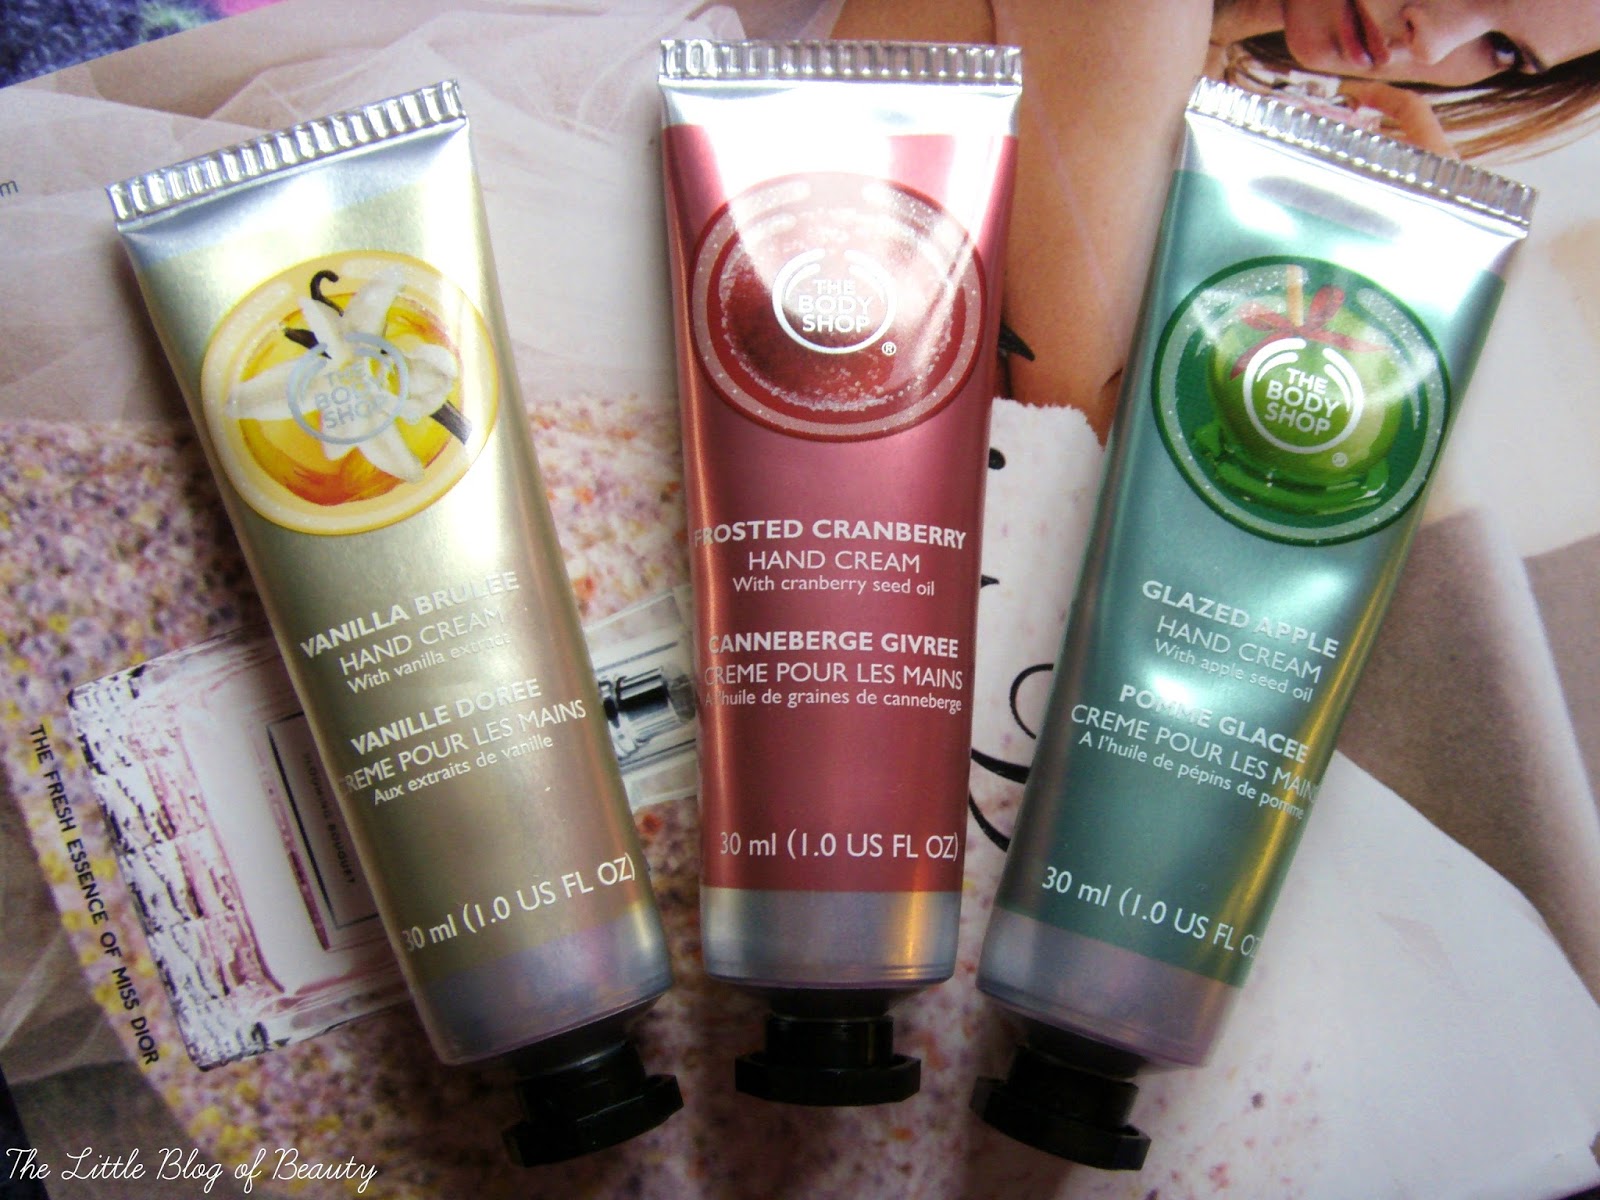 The Body Shop Christmas hand creams | The Little Blog of ...